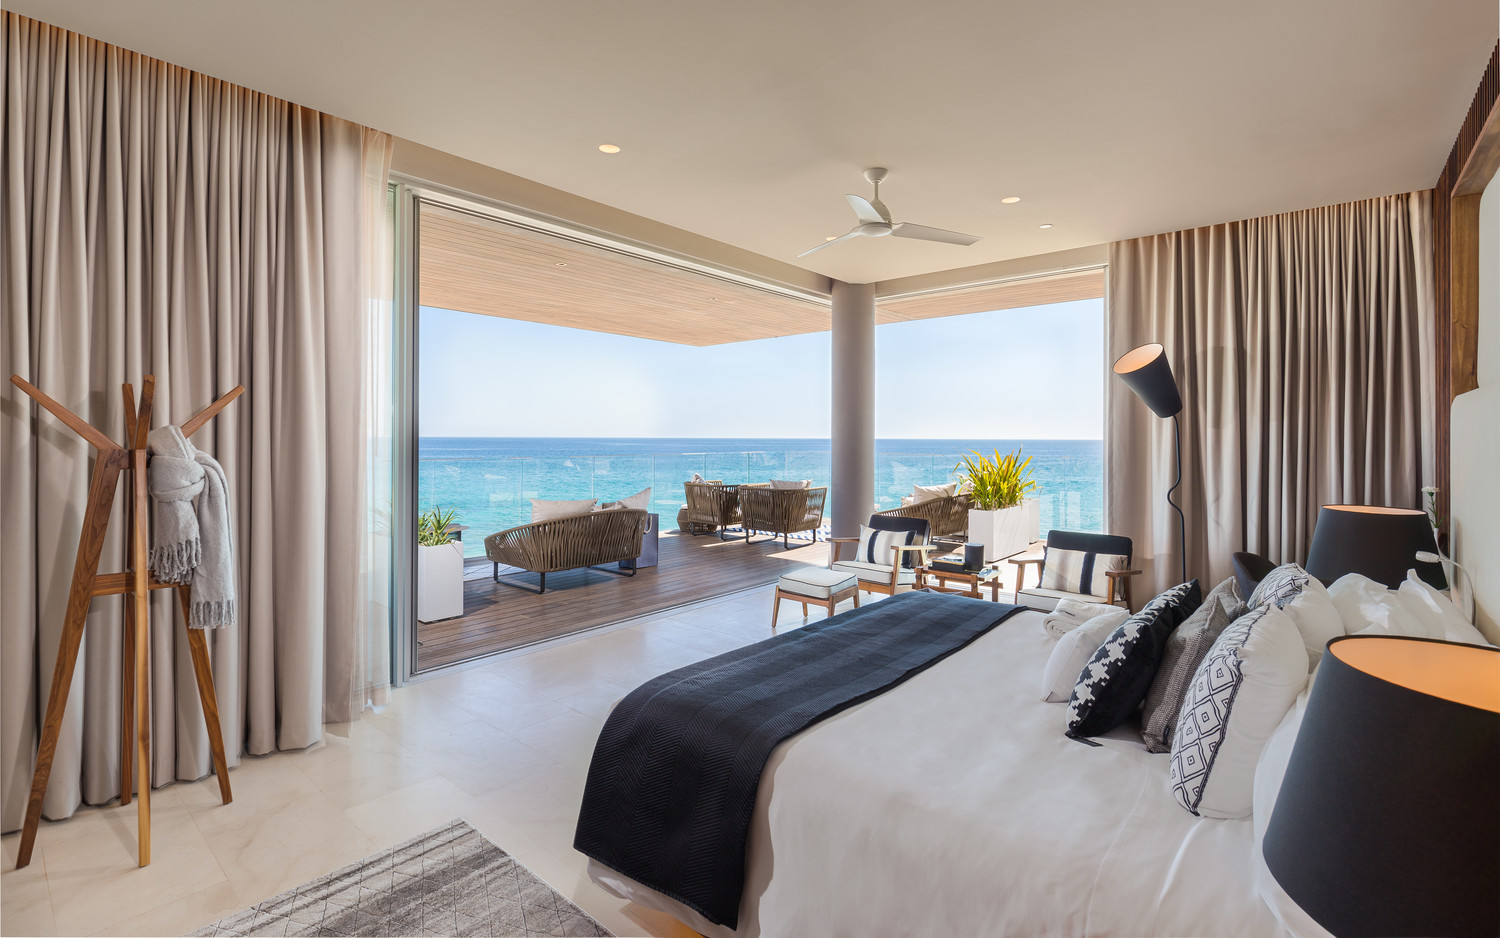 Marriott International Announces The Luxury Collection’s First Los Cabos Property, Solaz Resort to Open in June 2018